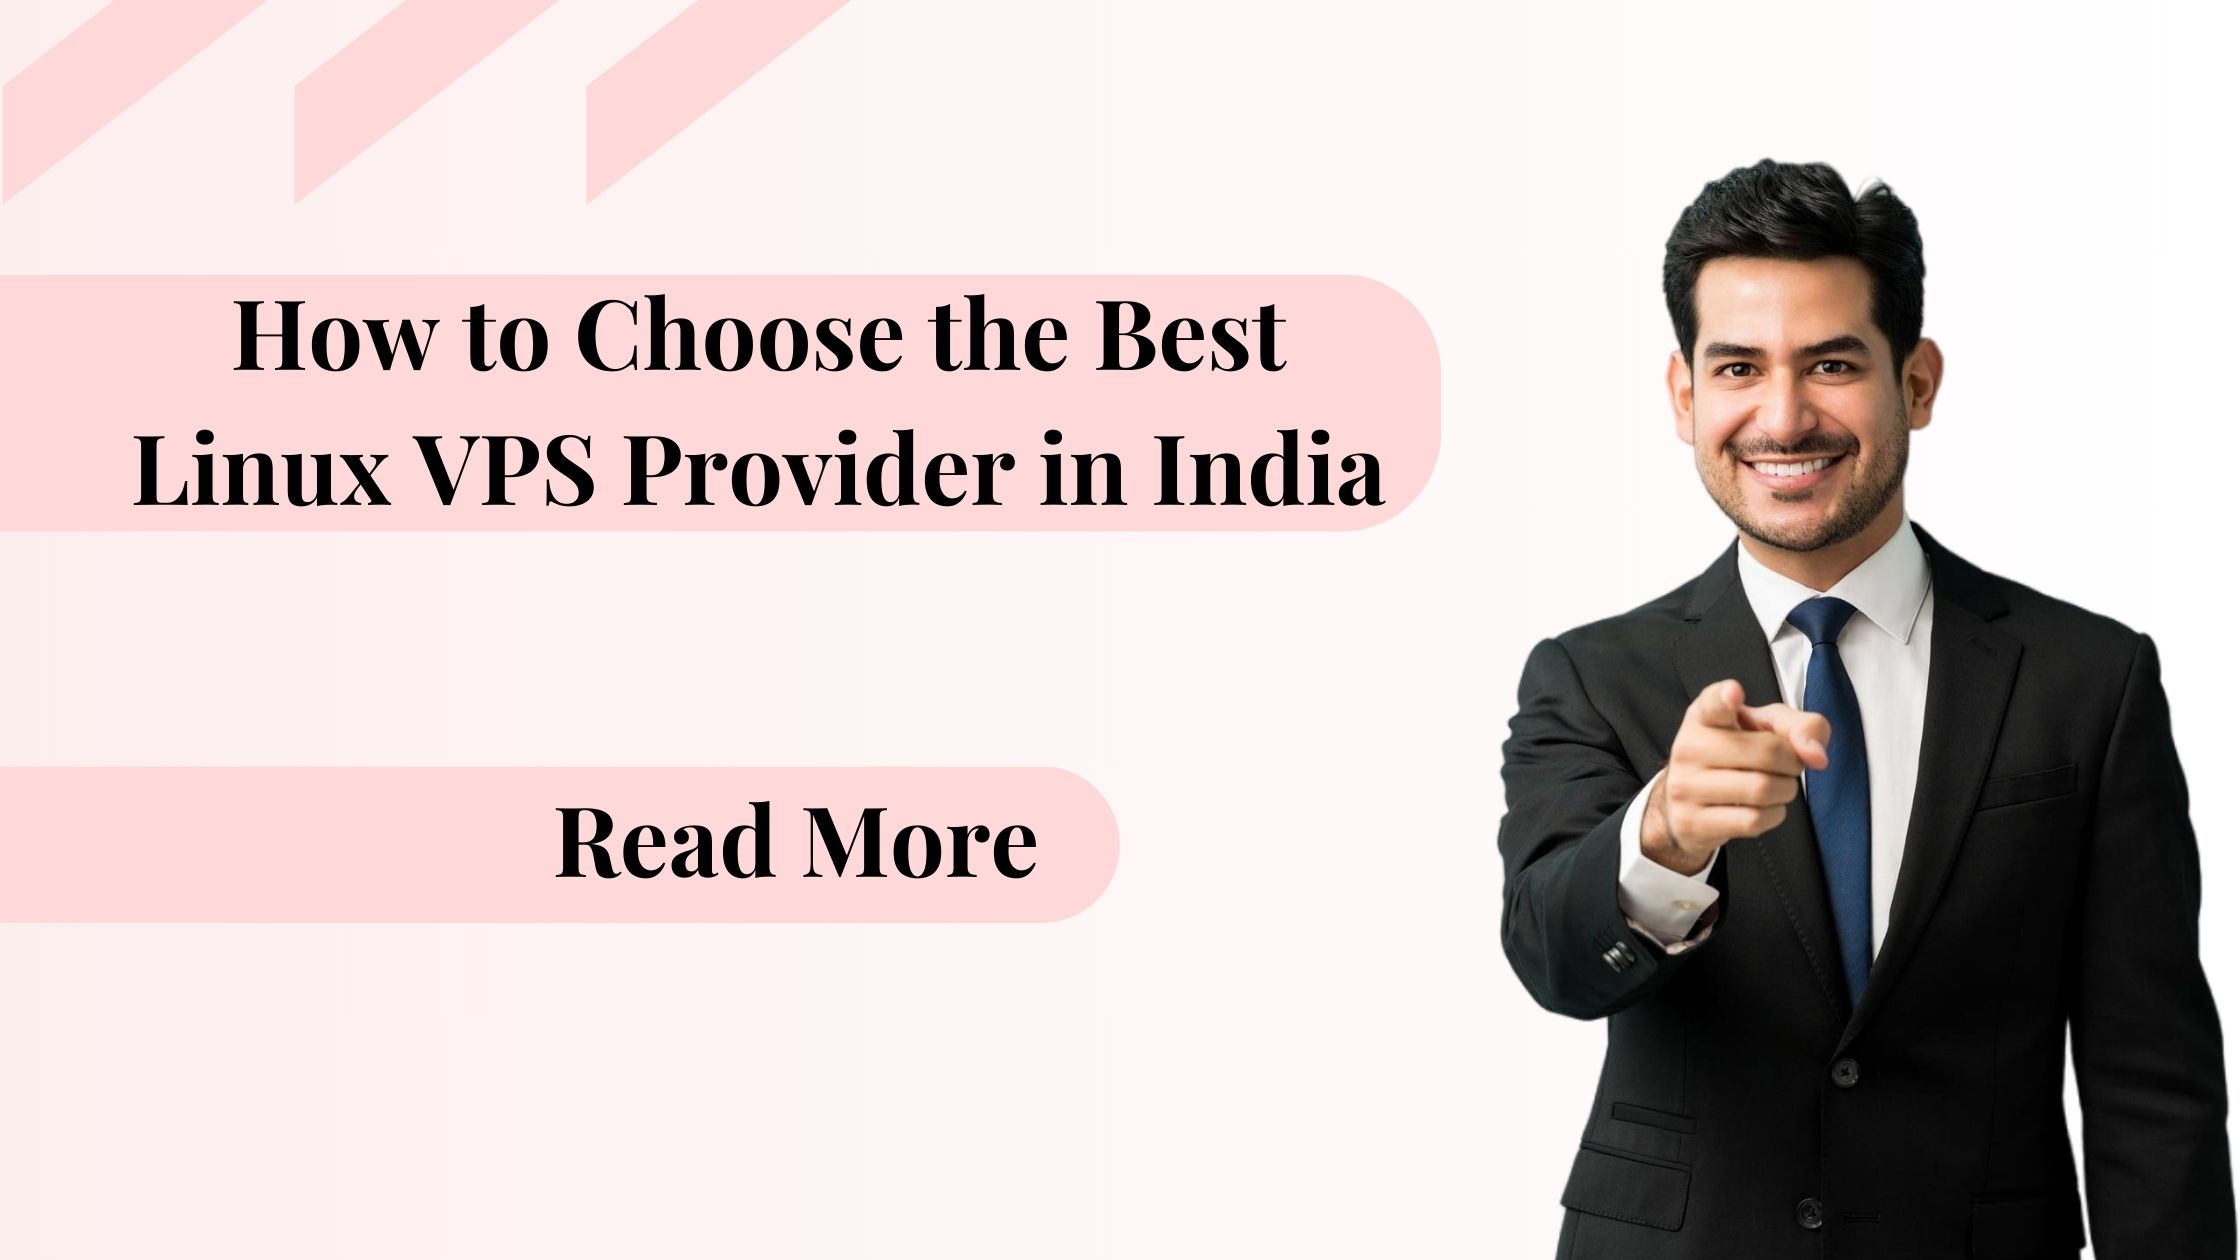 Choosing the right Linux VPS provider in India is crucial for online success. This guide will help you identify key features to consider, focusing on providers like Ideastack and Hostingbuzz.